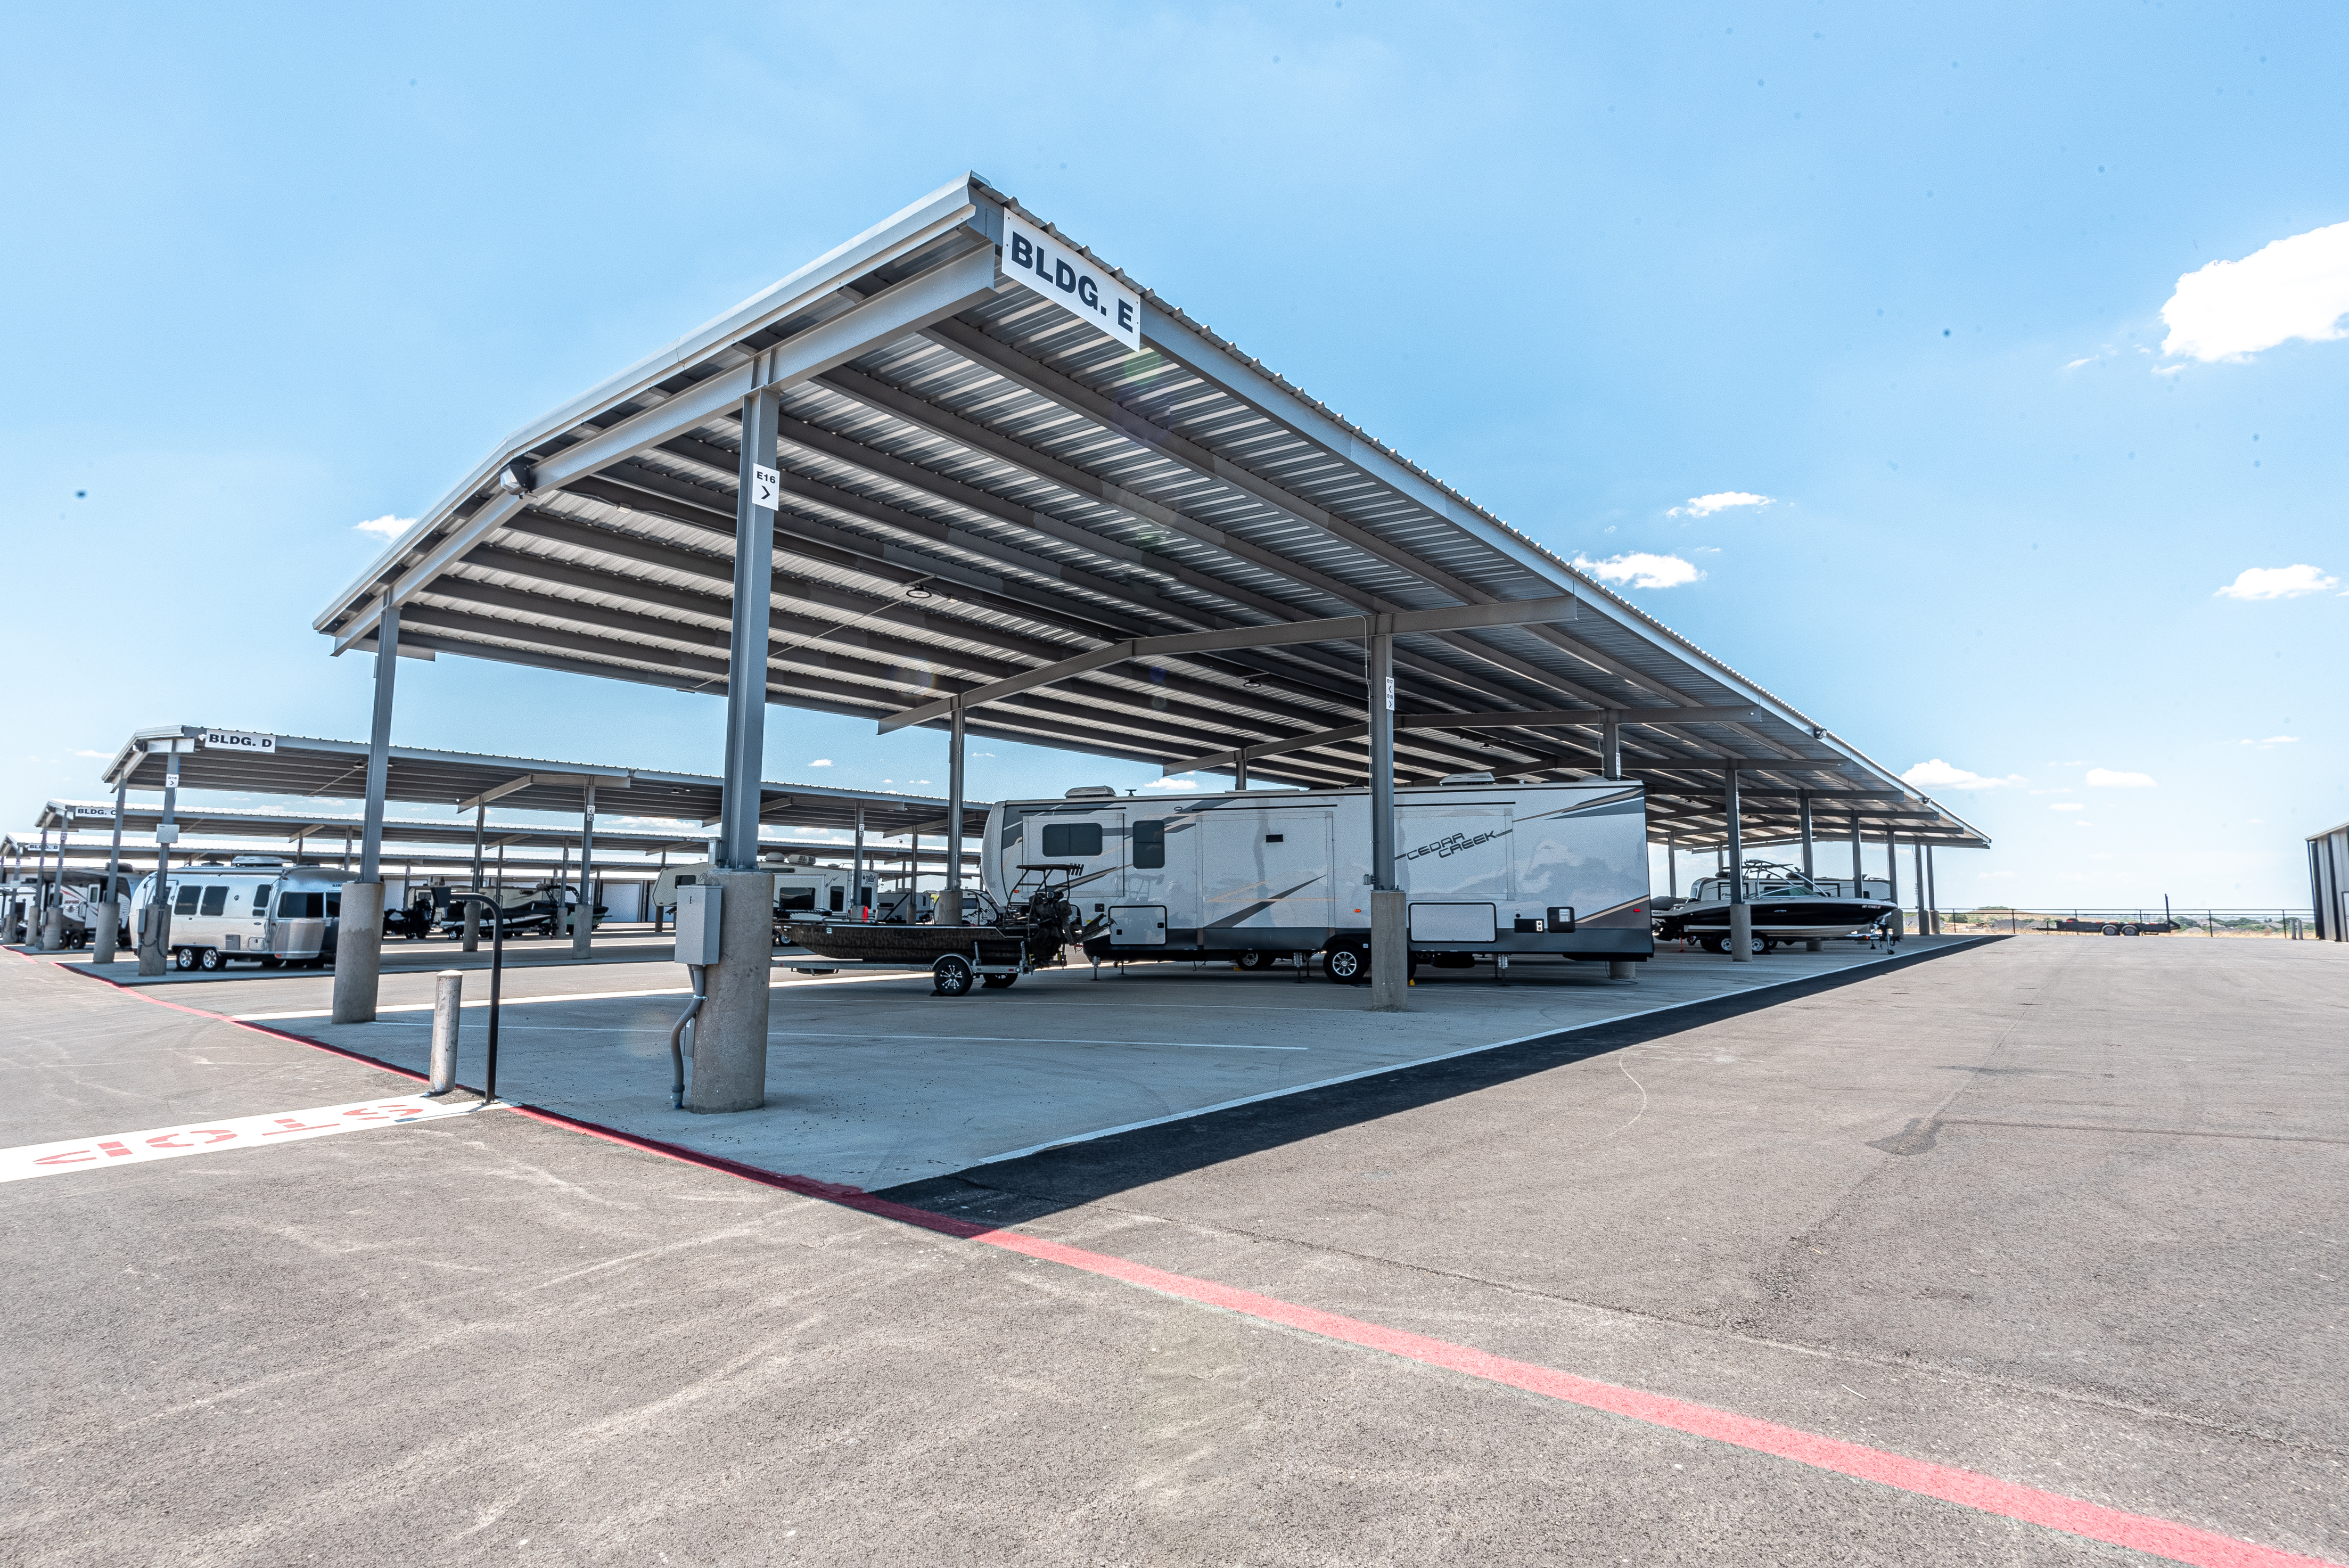 Haslet Boat & RV Storage offers Canopy parking units in a variety of sizes to fit your storage needs